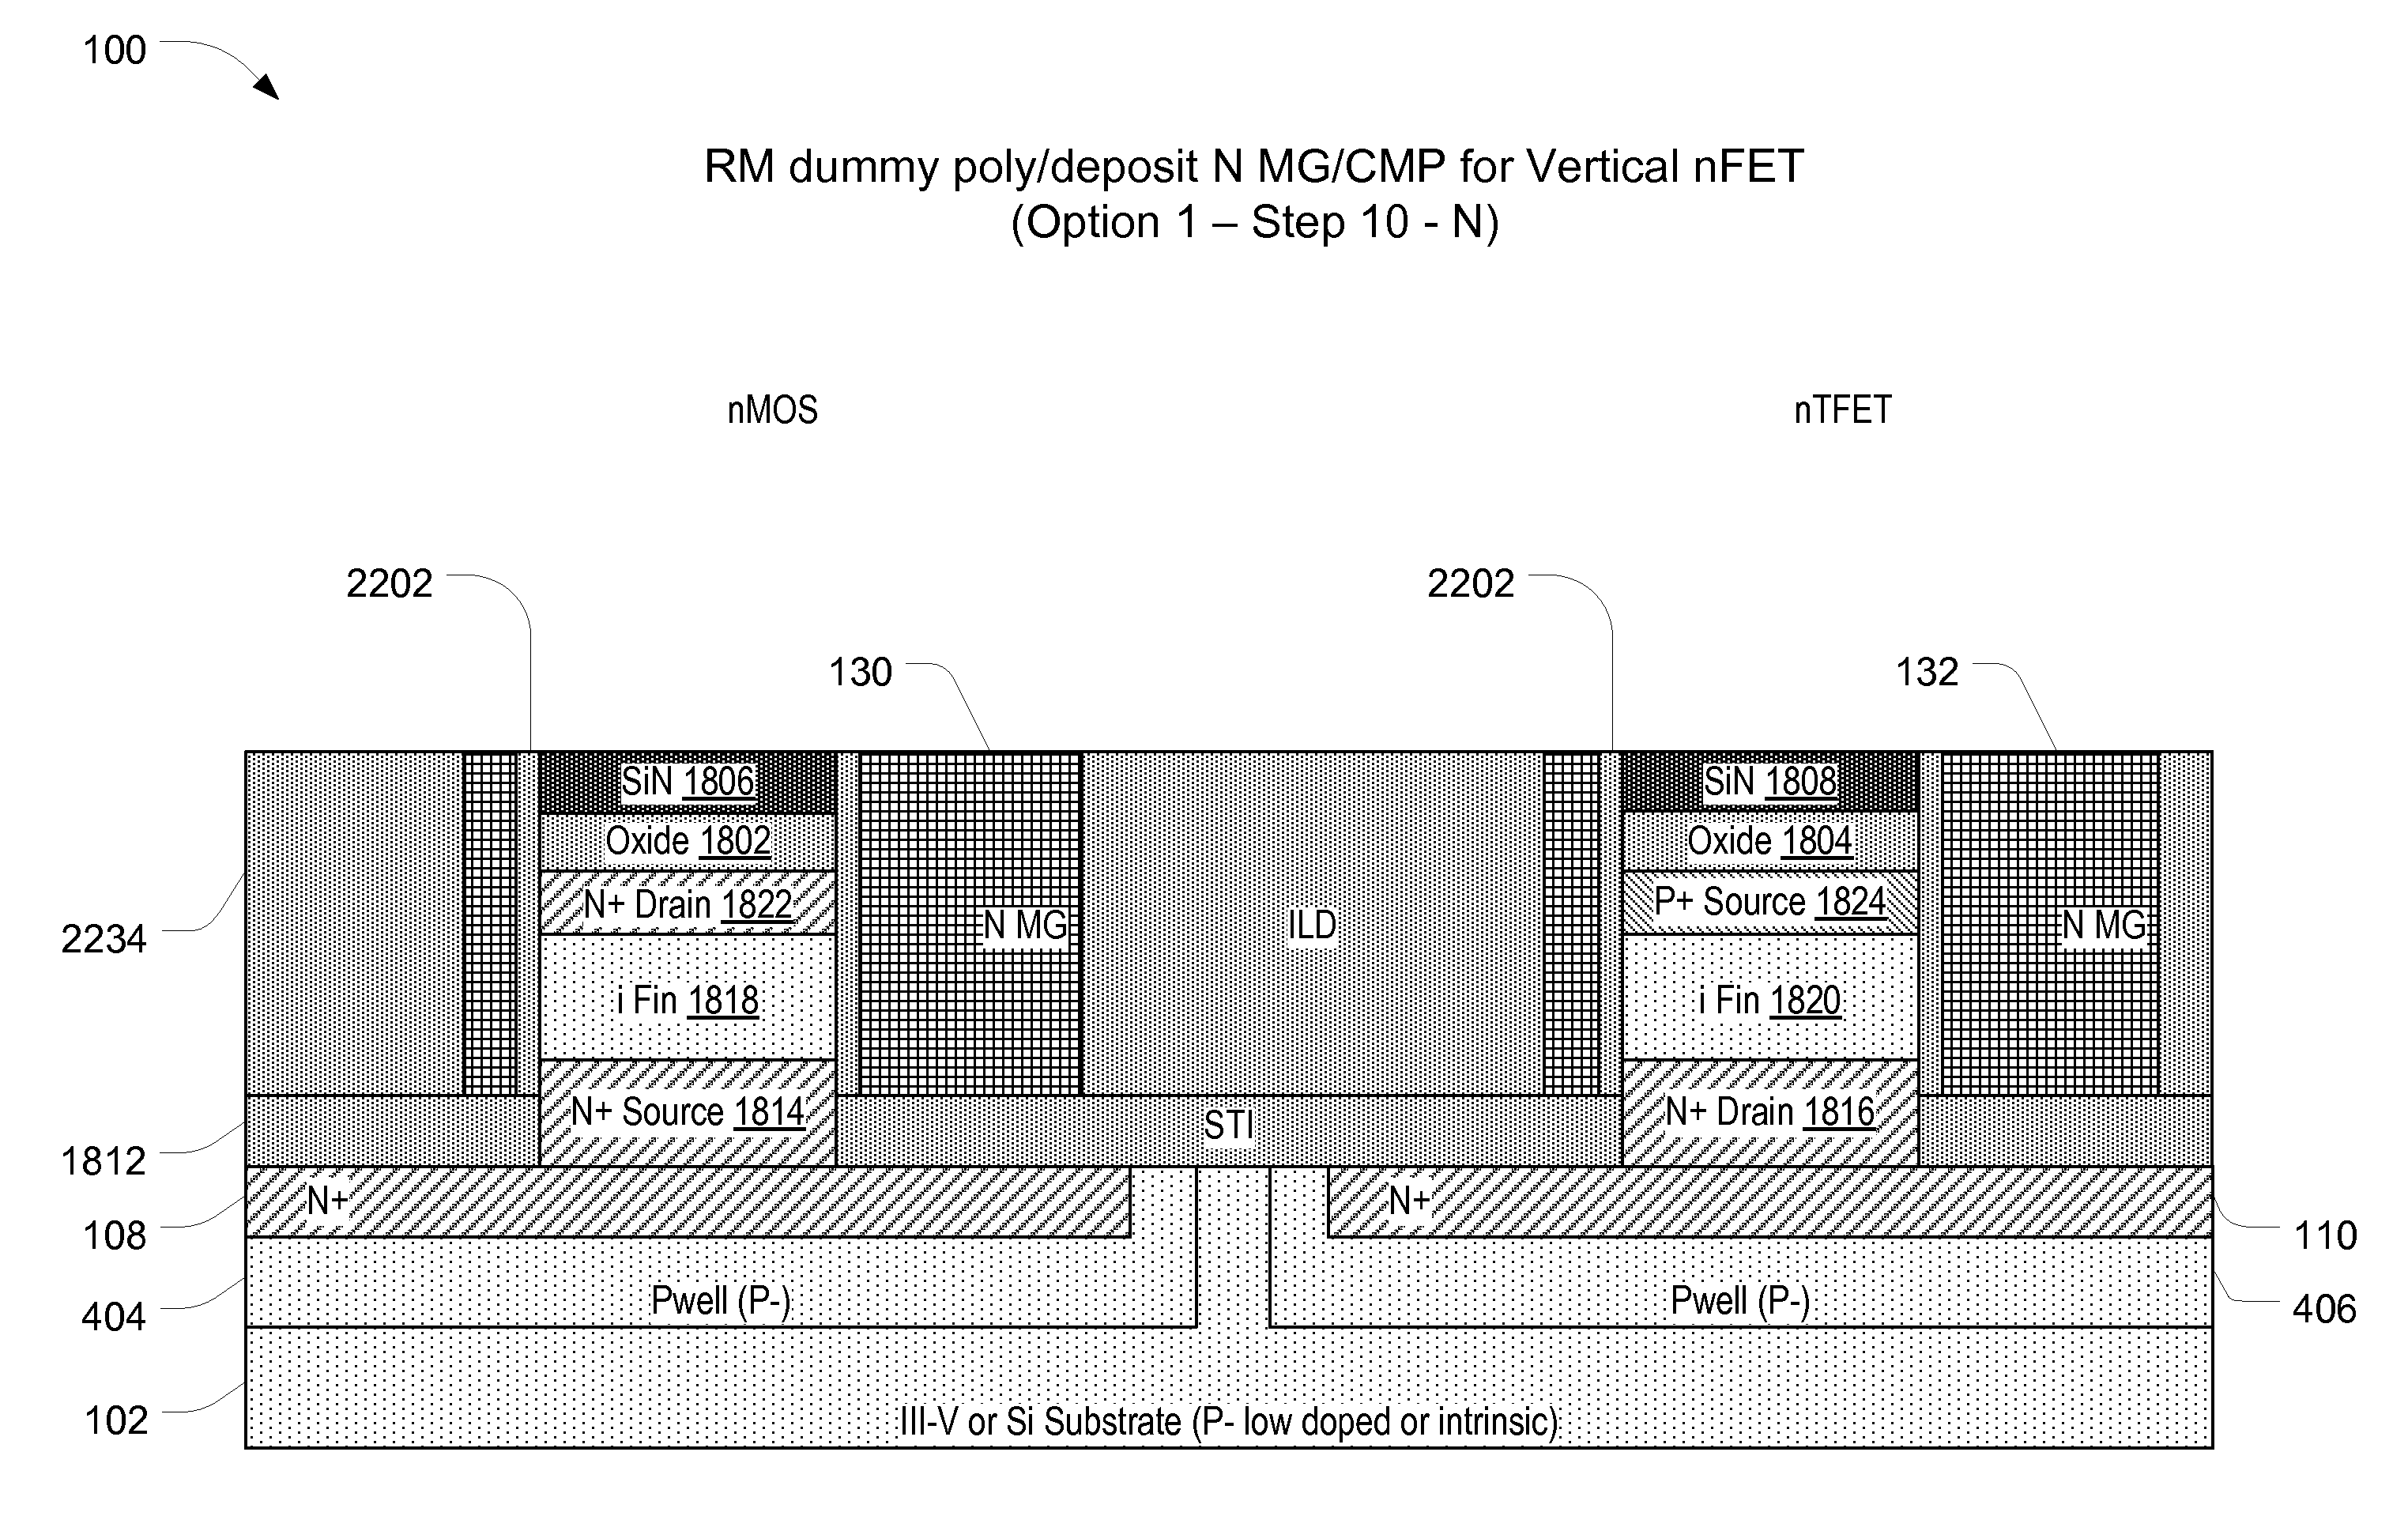 Complementary metal-oxide semiconductor (CMOS) transistor and tunnel field-effect transistor (TFET) on a single substrate